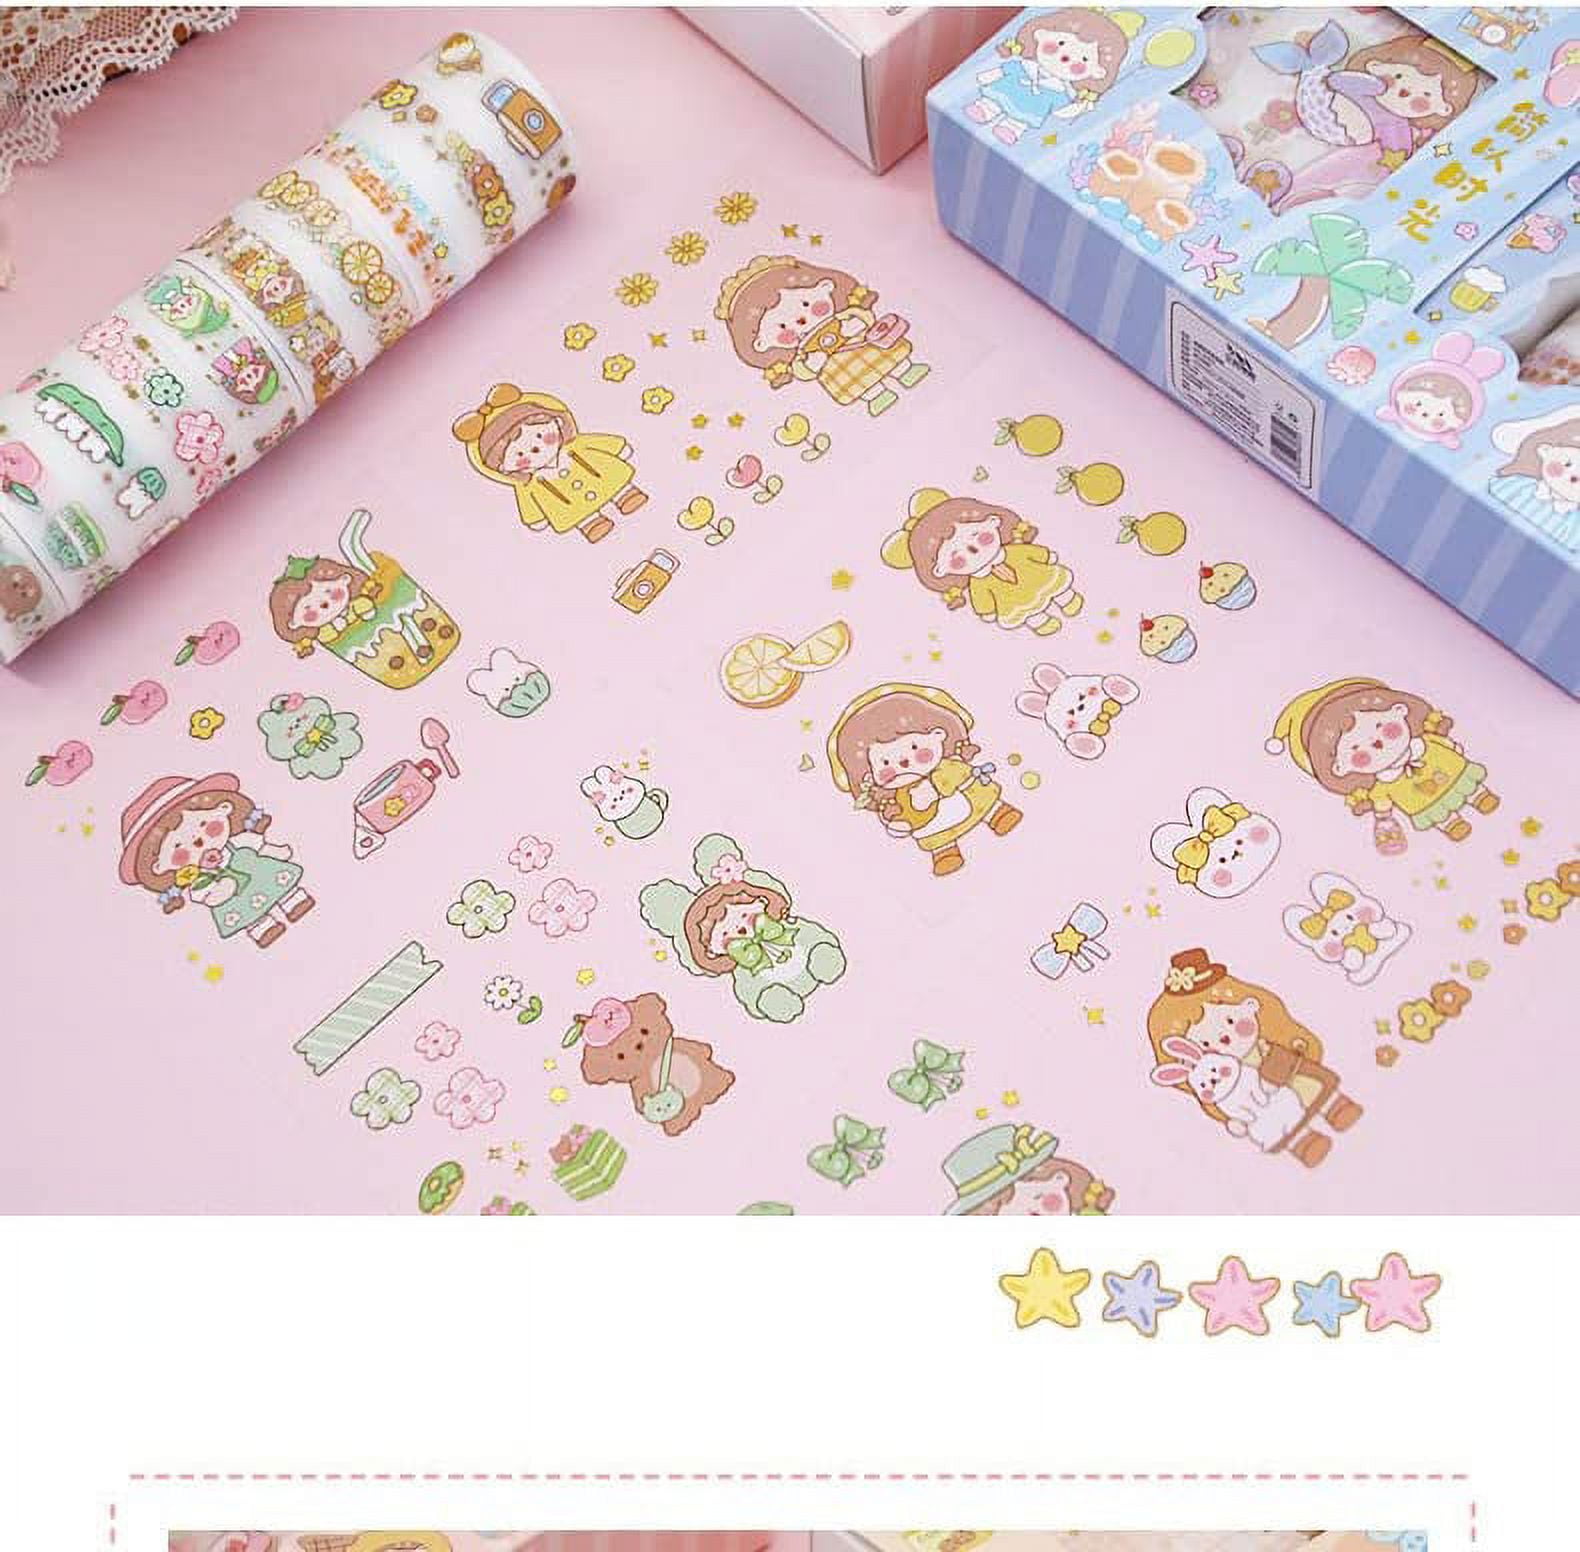 Washi Tape Set with Full Rainbow Of Pastel Colors